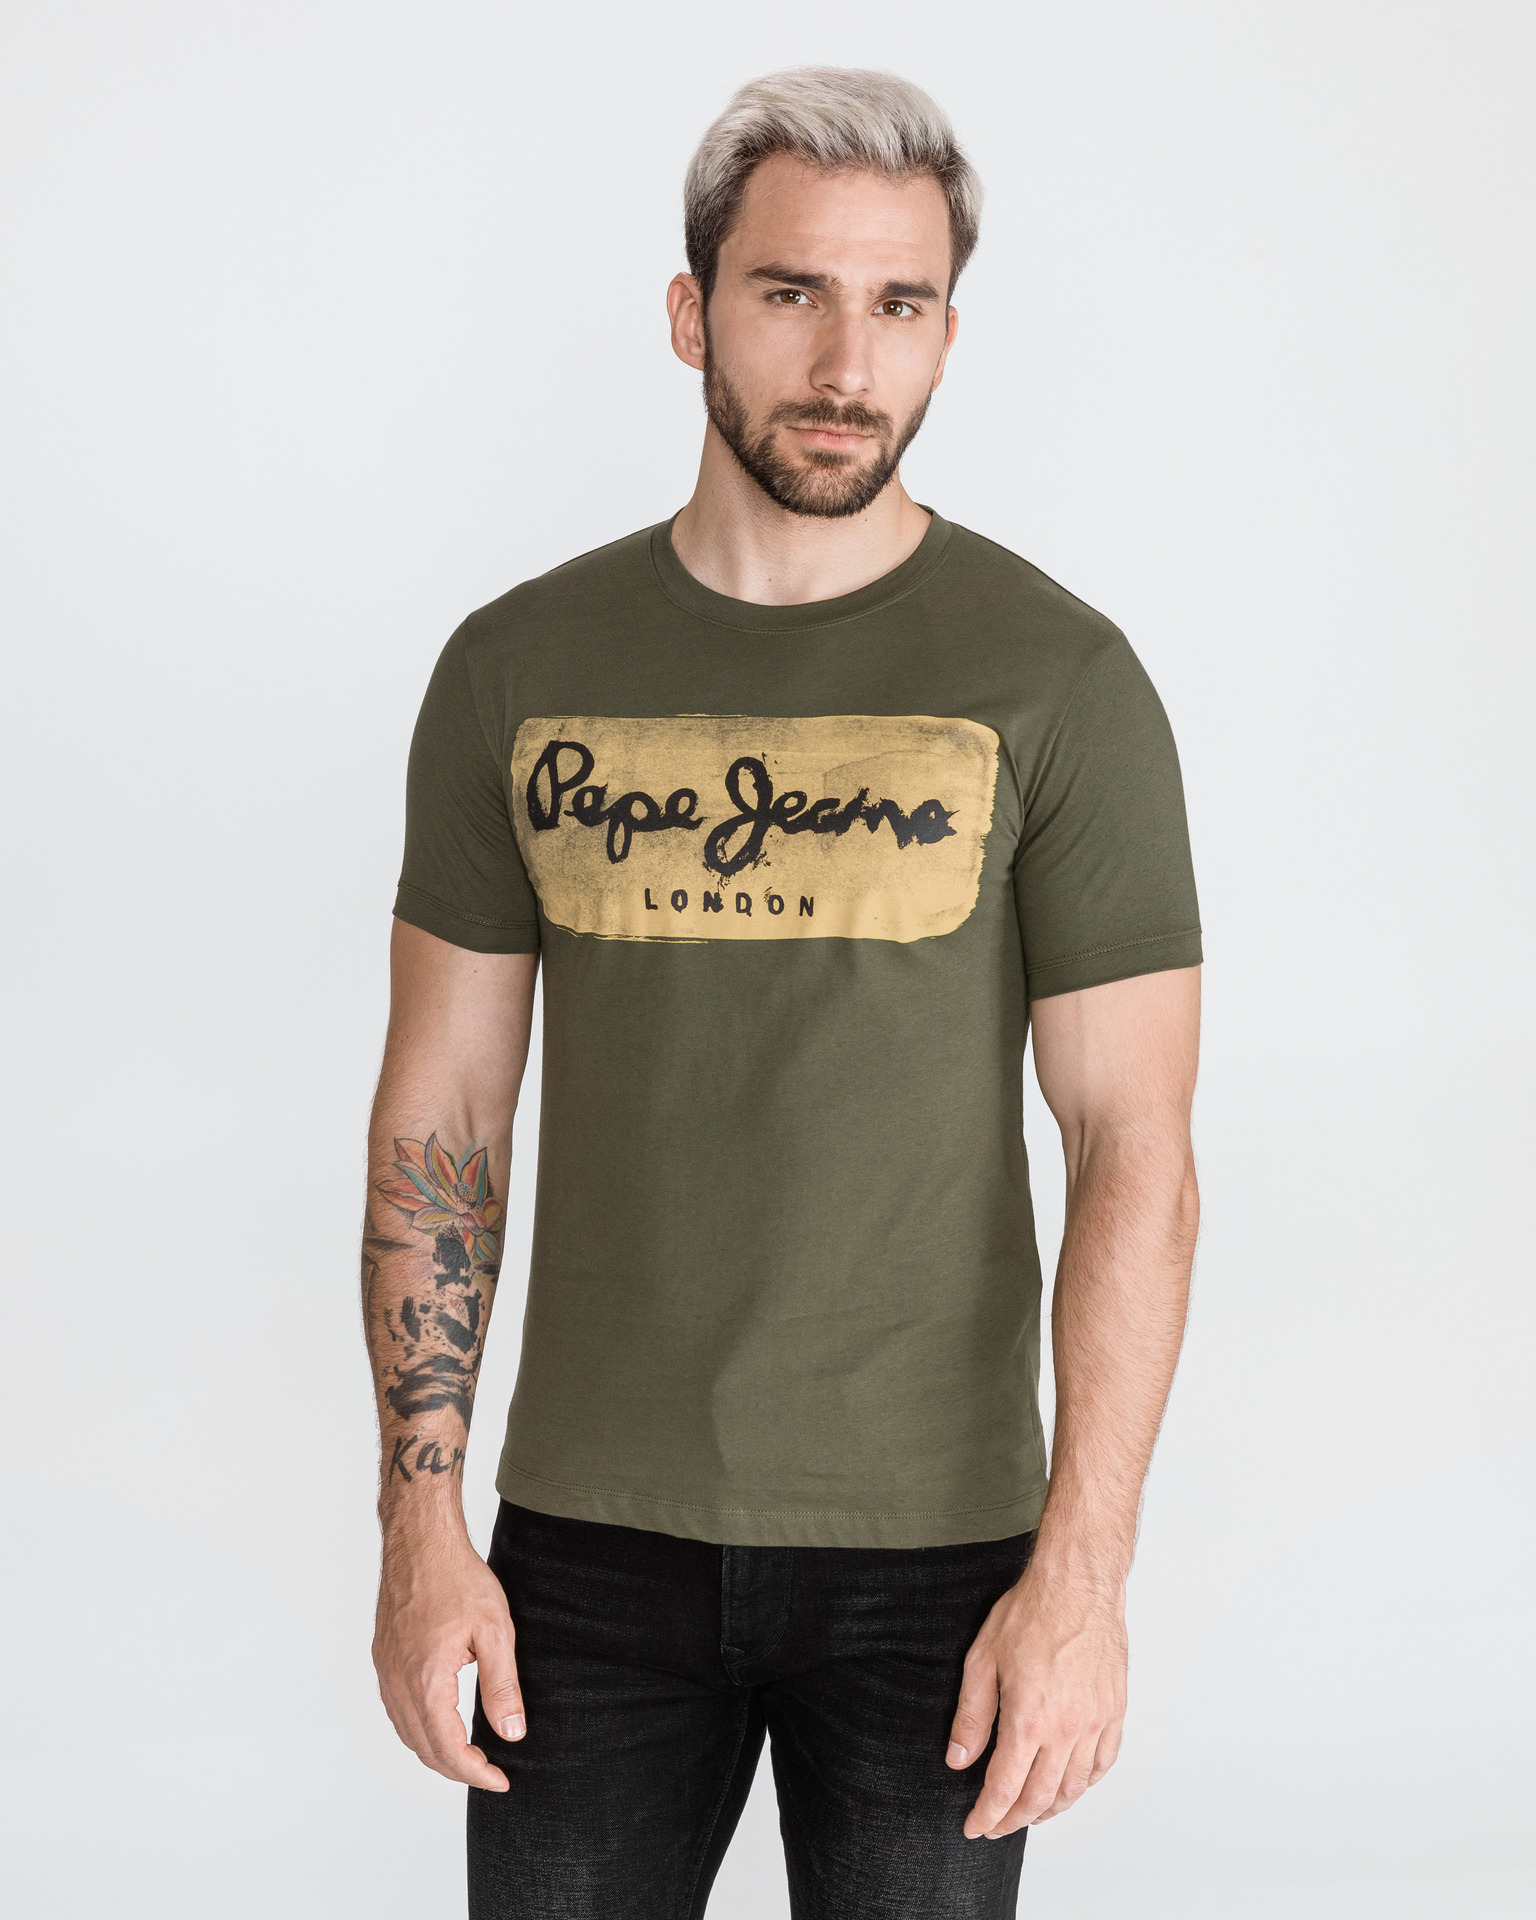 Pepe Charing Jeans T-shirt -